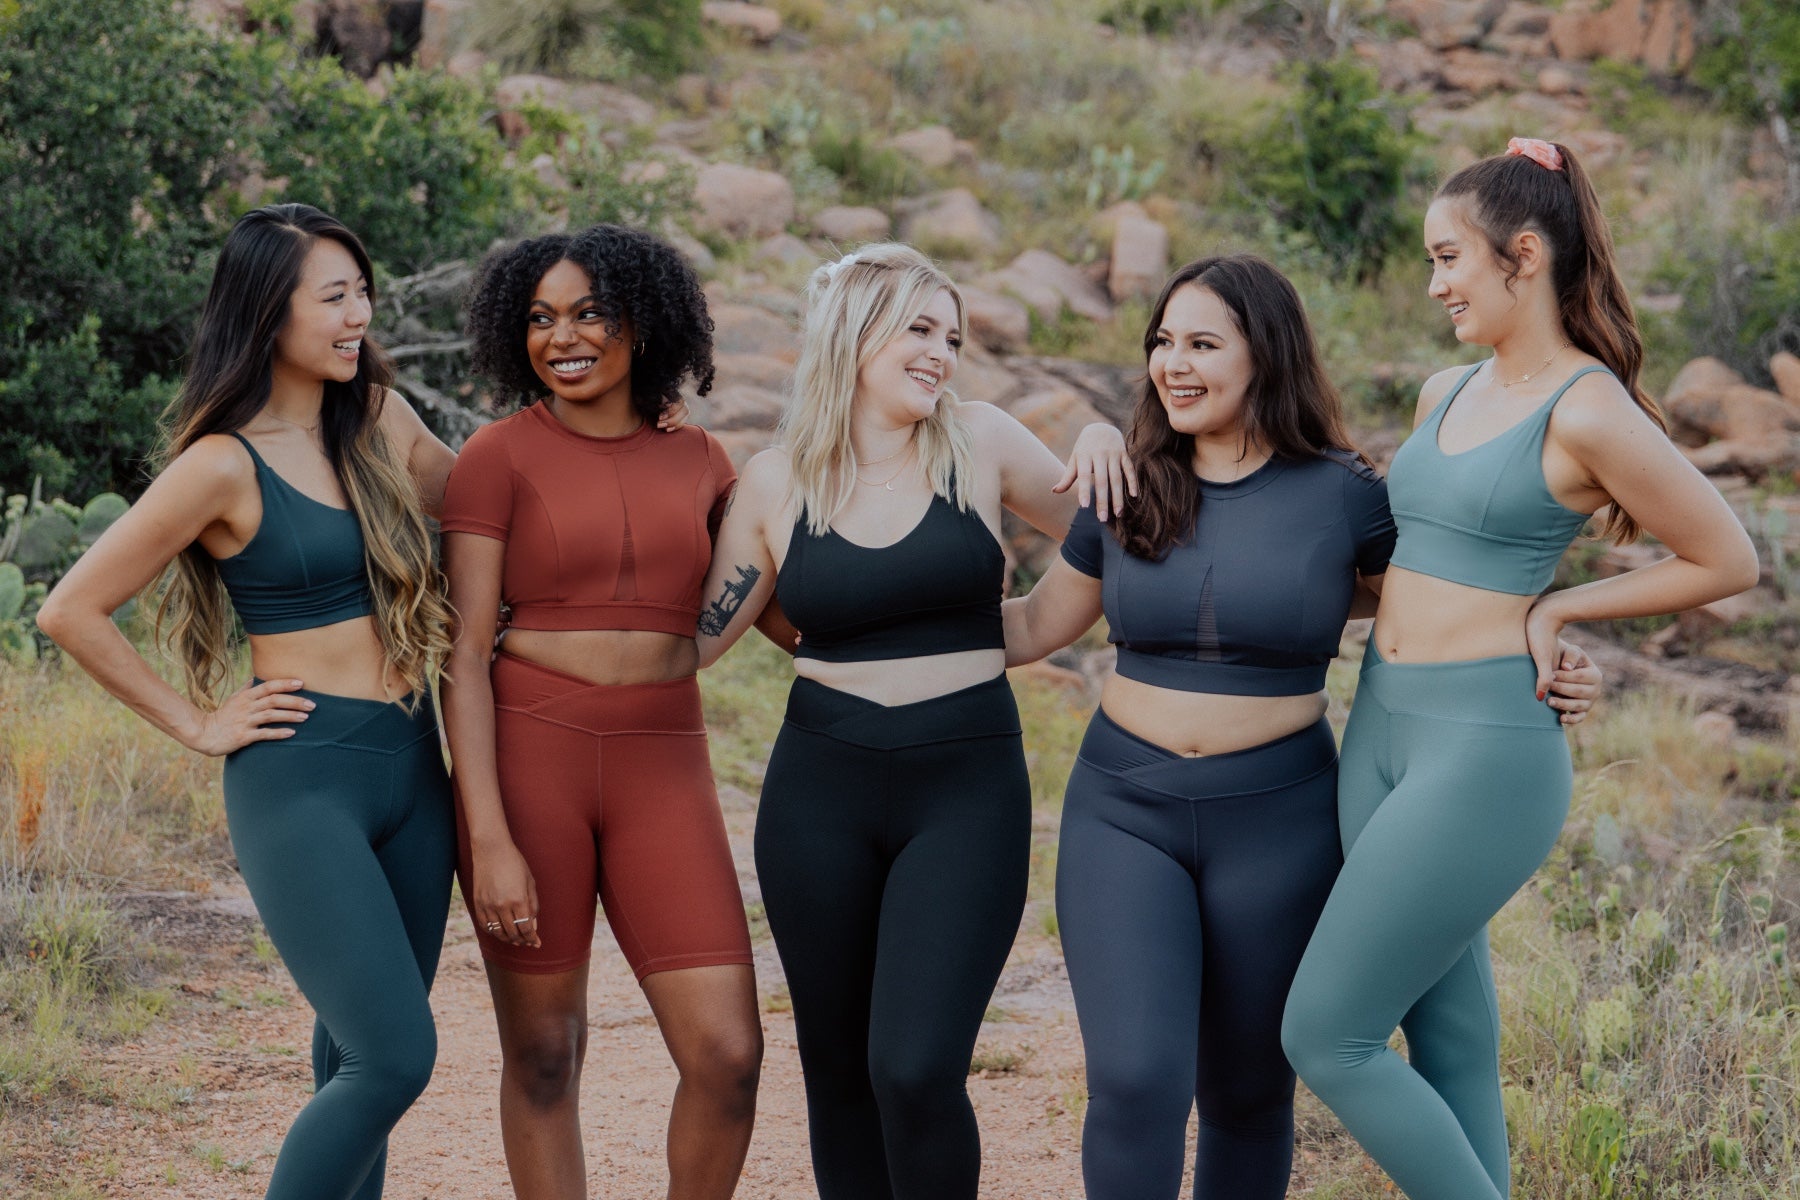 What are you views on POPFLEX activewear and their functional